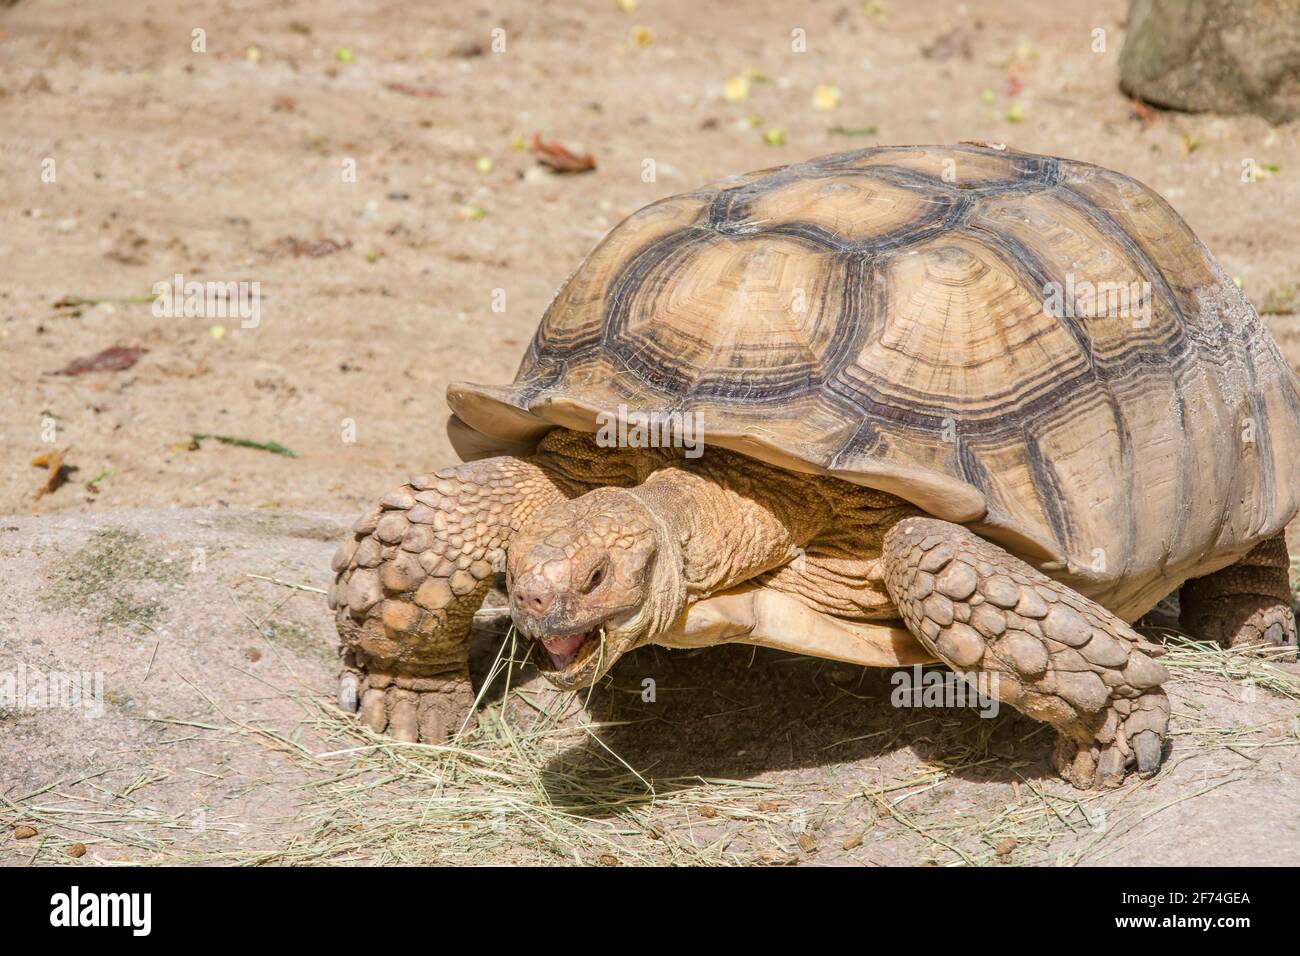 The African spurred tortoise eats grass. It is a species of tortoise, which inhabits the southern edge of the Sahara desert in Africa. Stock Photo